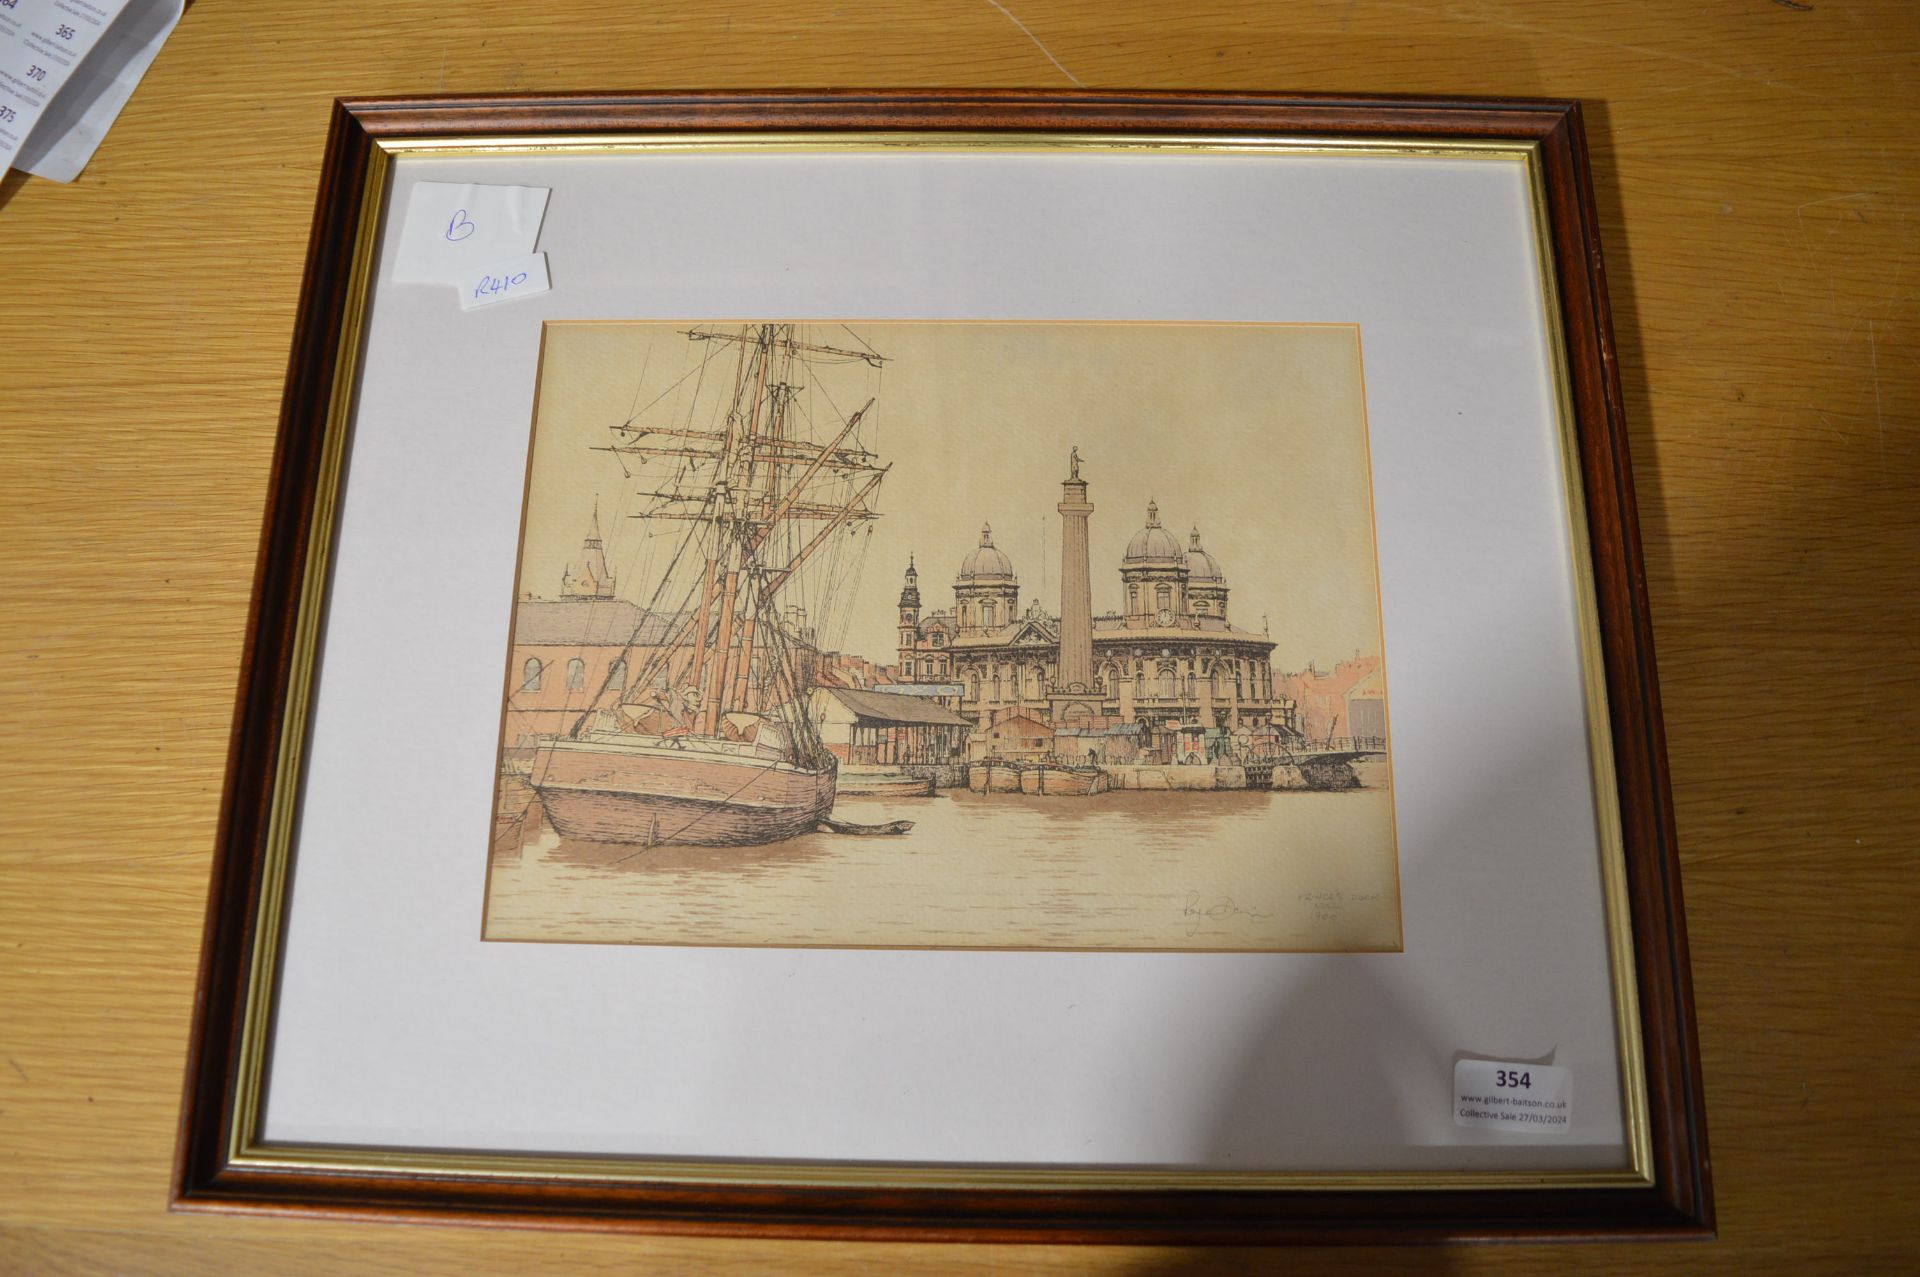 Framed Print of Princess Dock, Hull, 1900 by Roger - Image 2 of 4